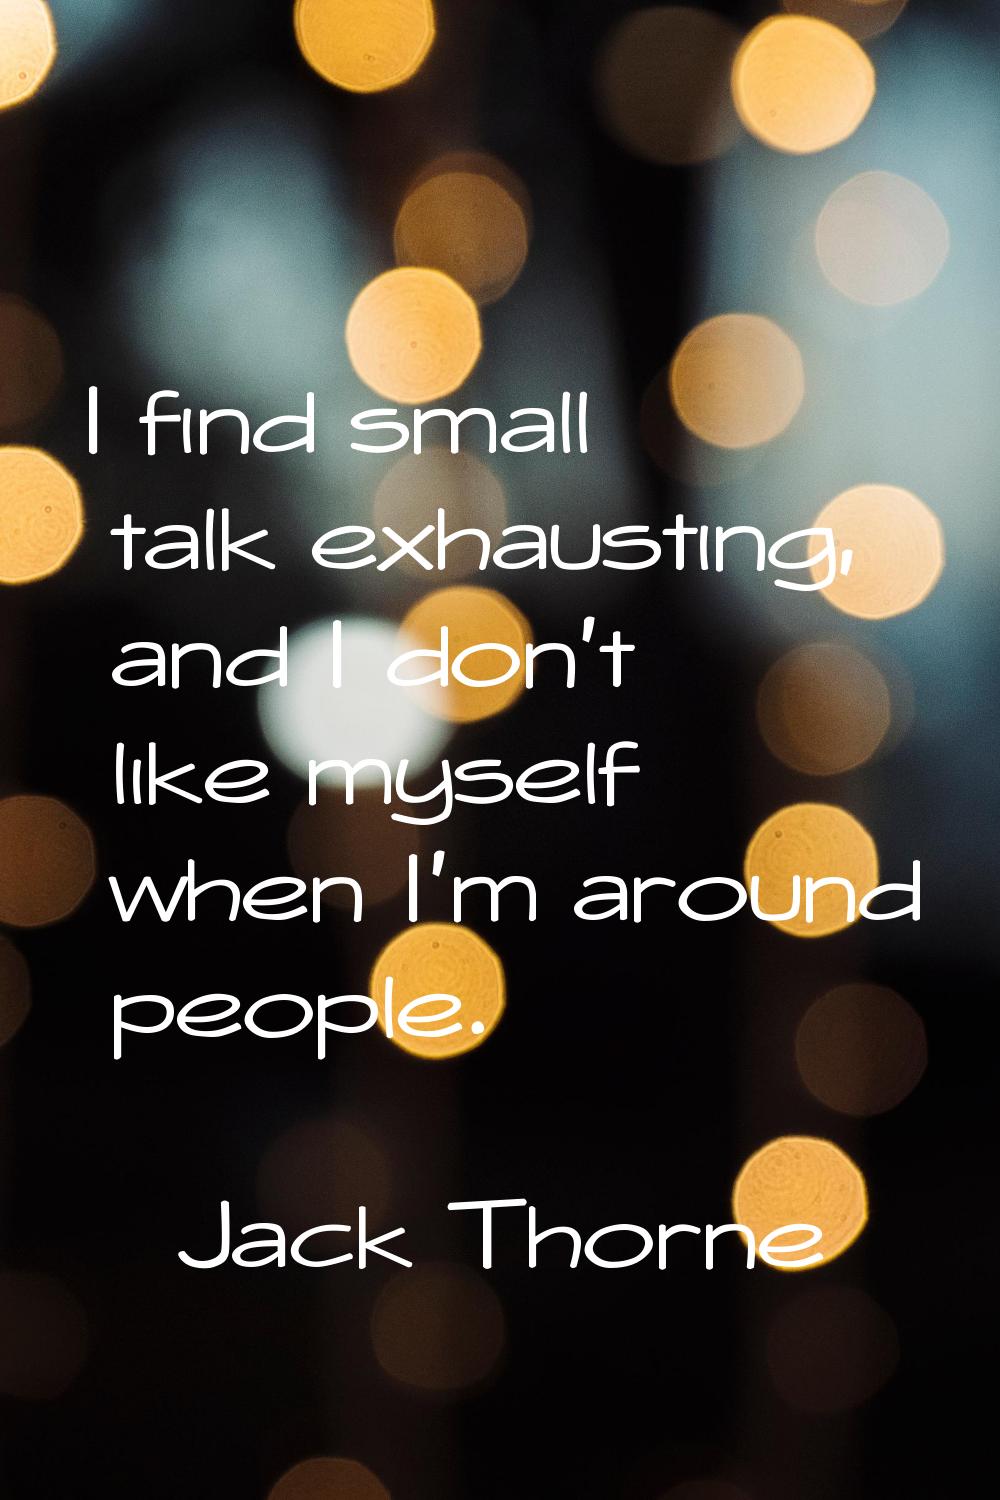 I find small talk exhausting, and I don't like myself when I'm around people.